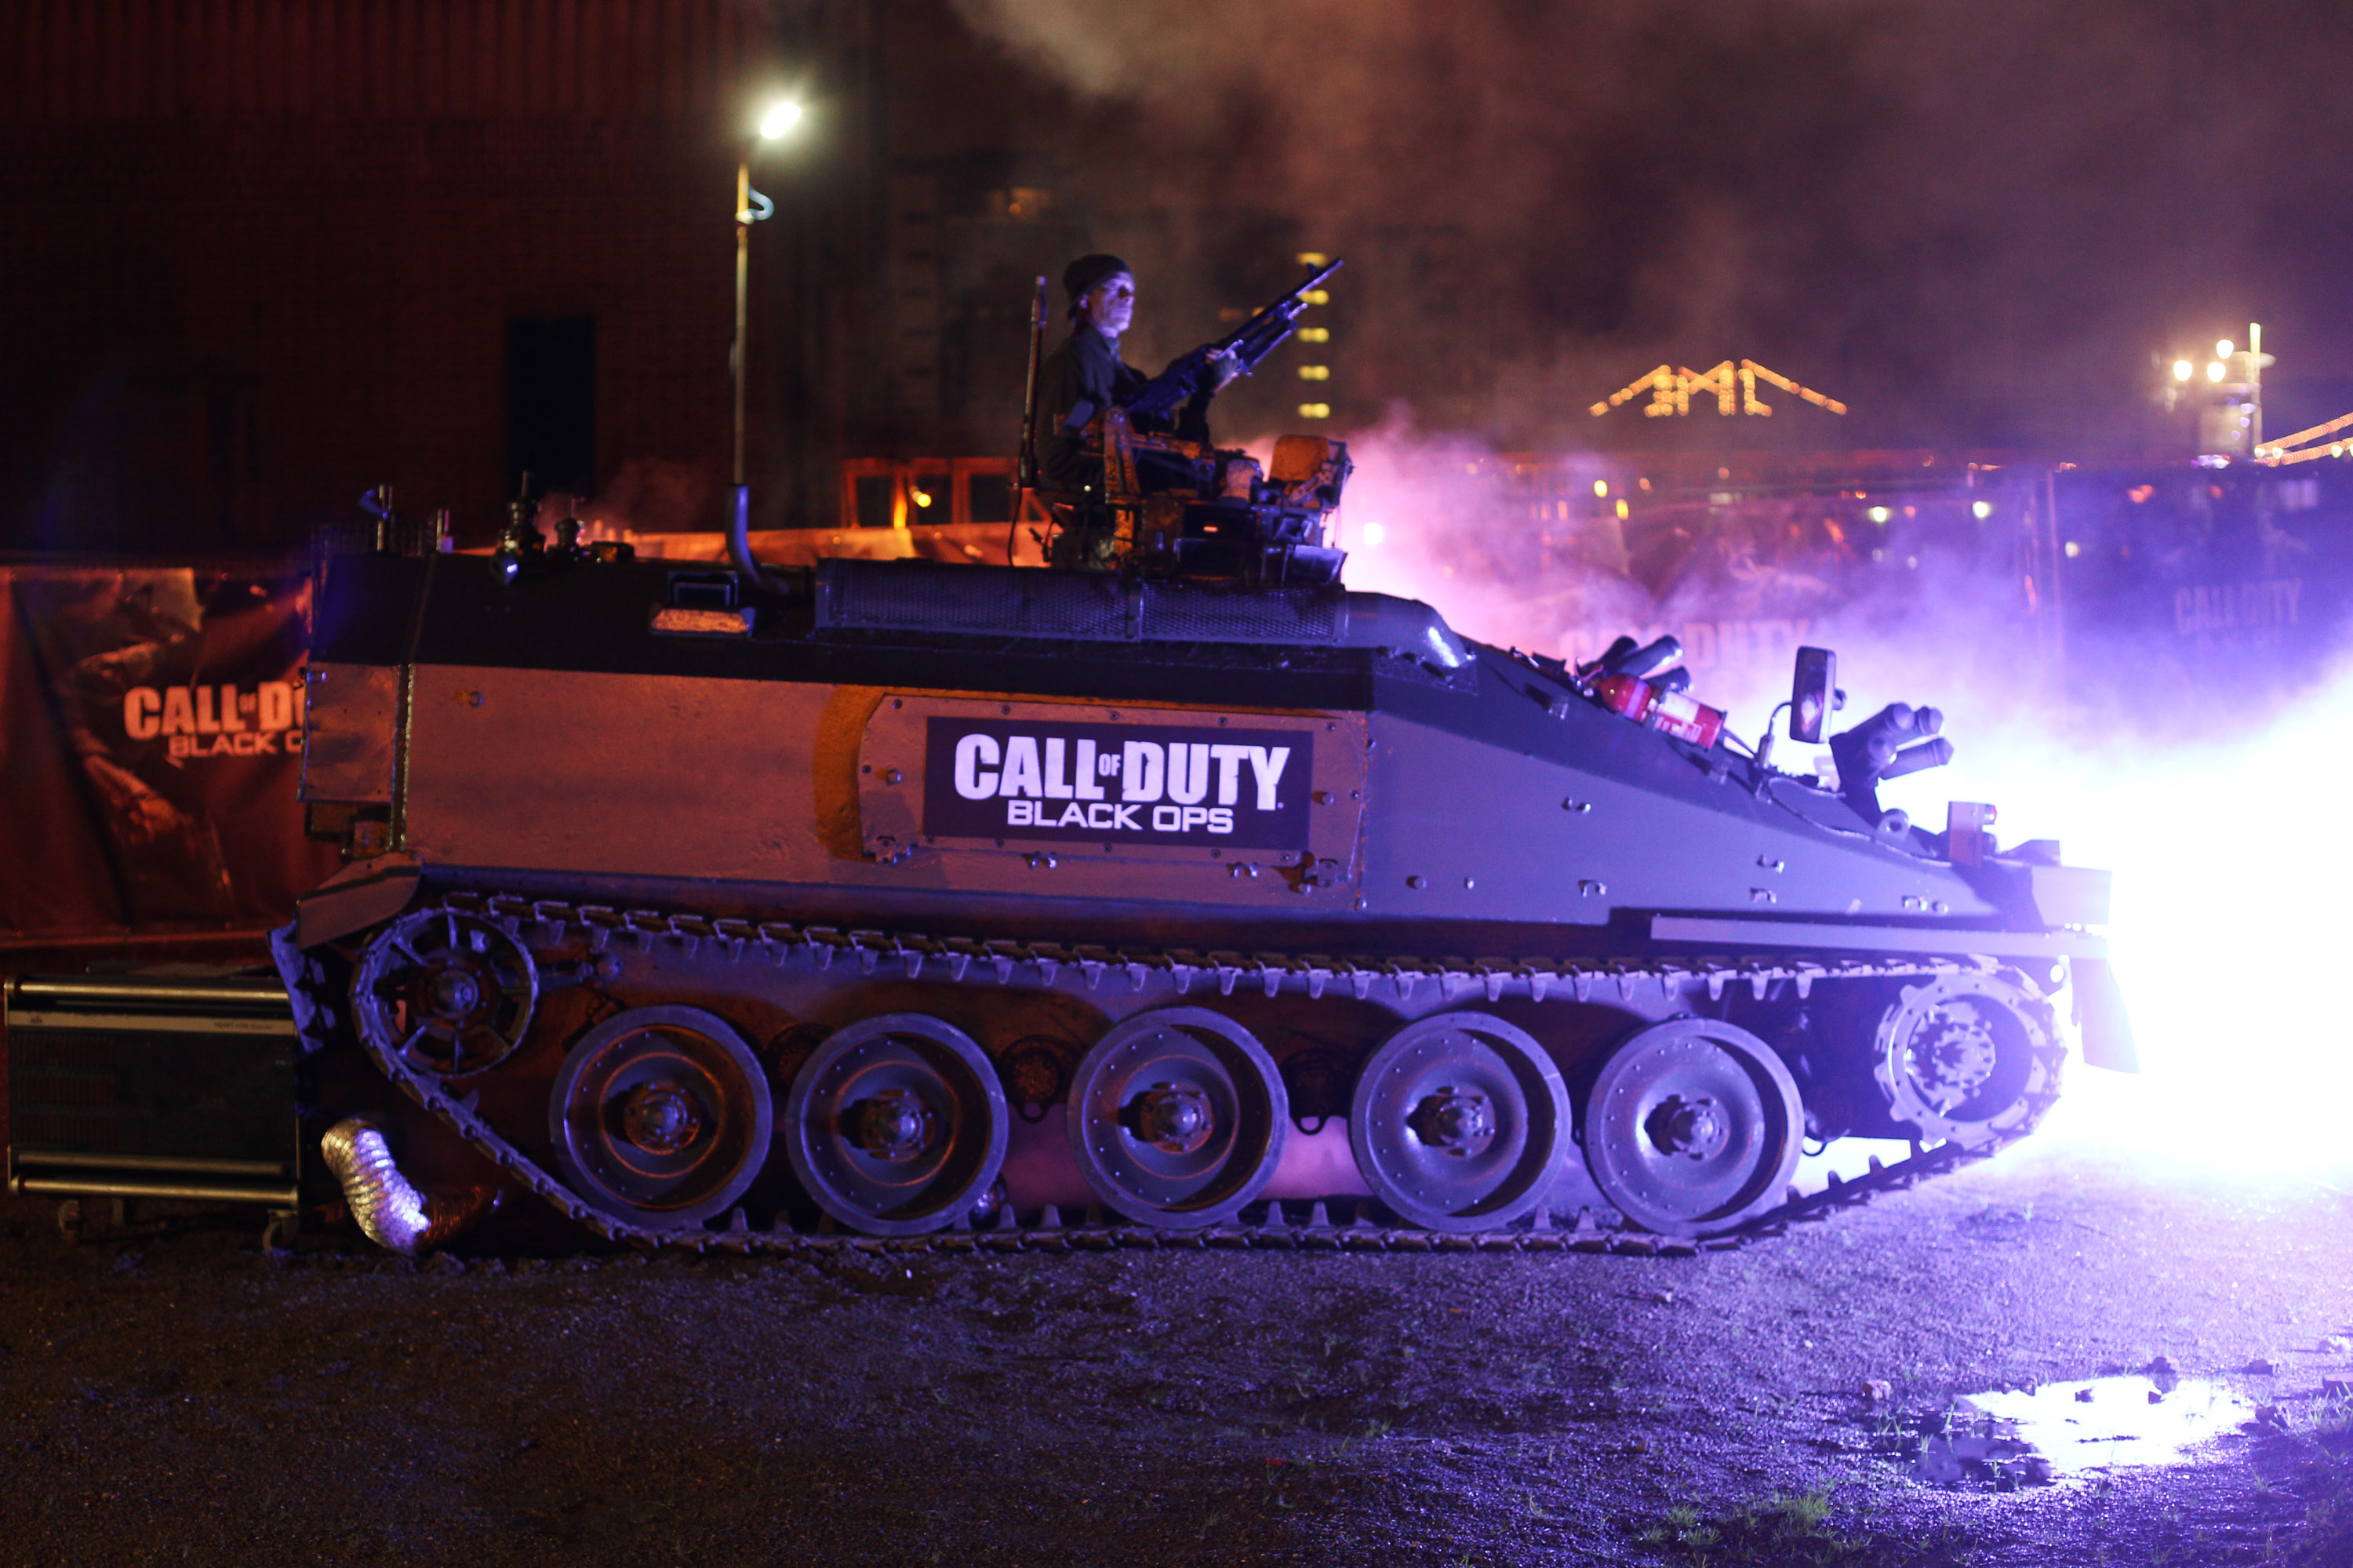 Call Of Duty: Black Ops - Launch Party 